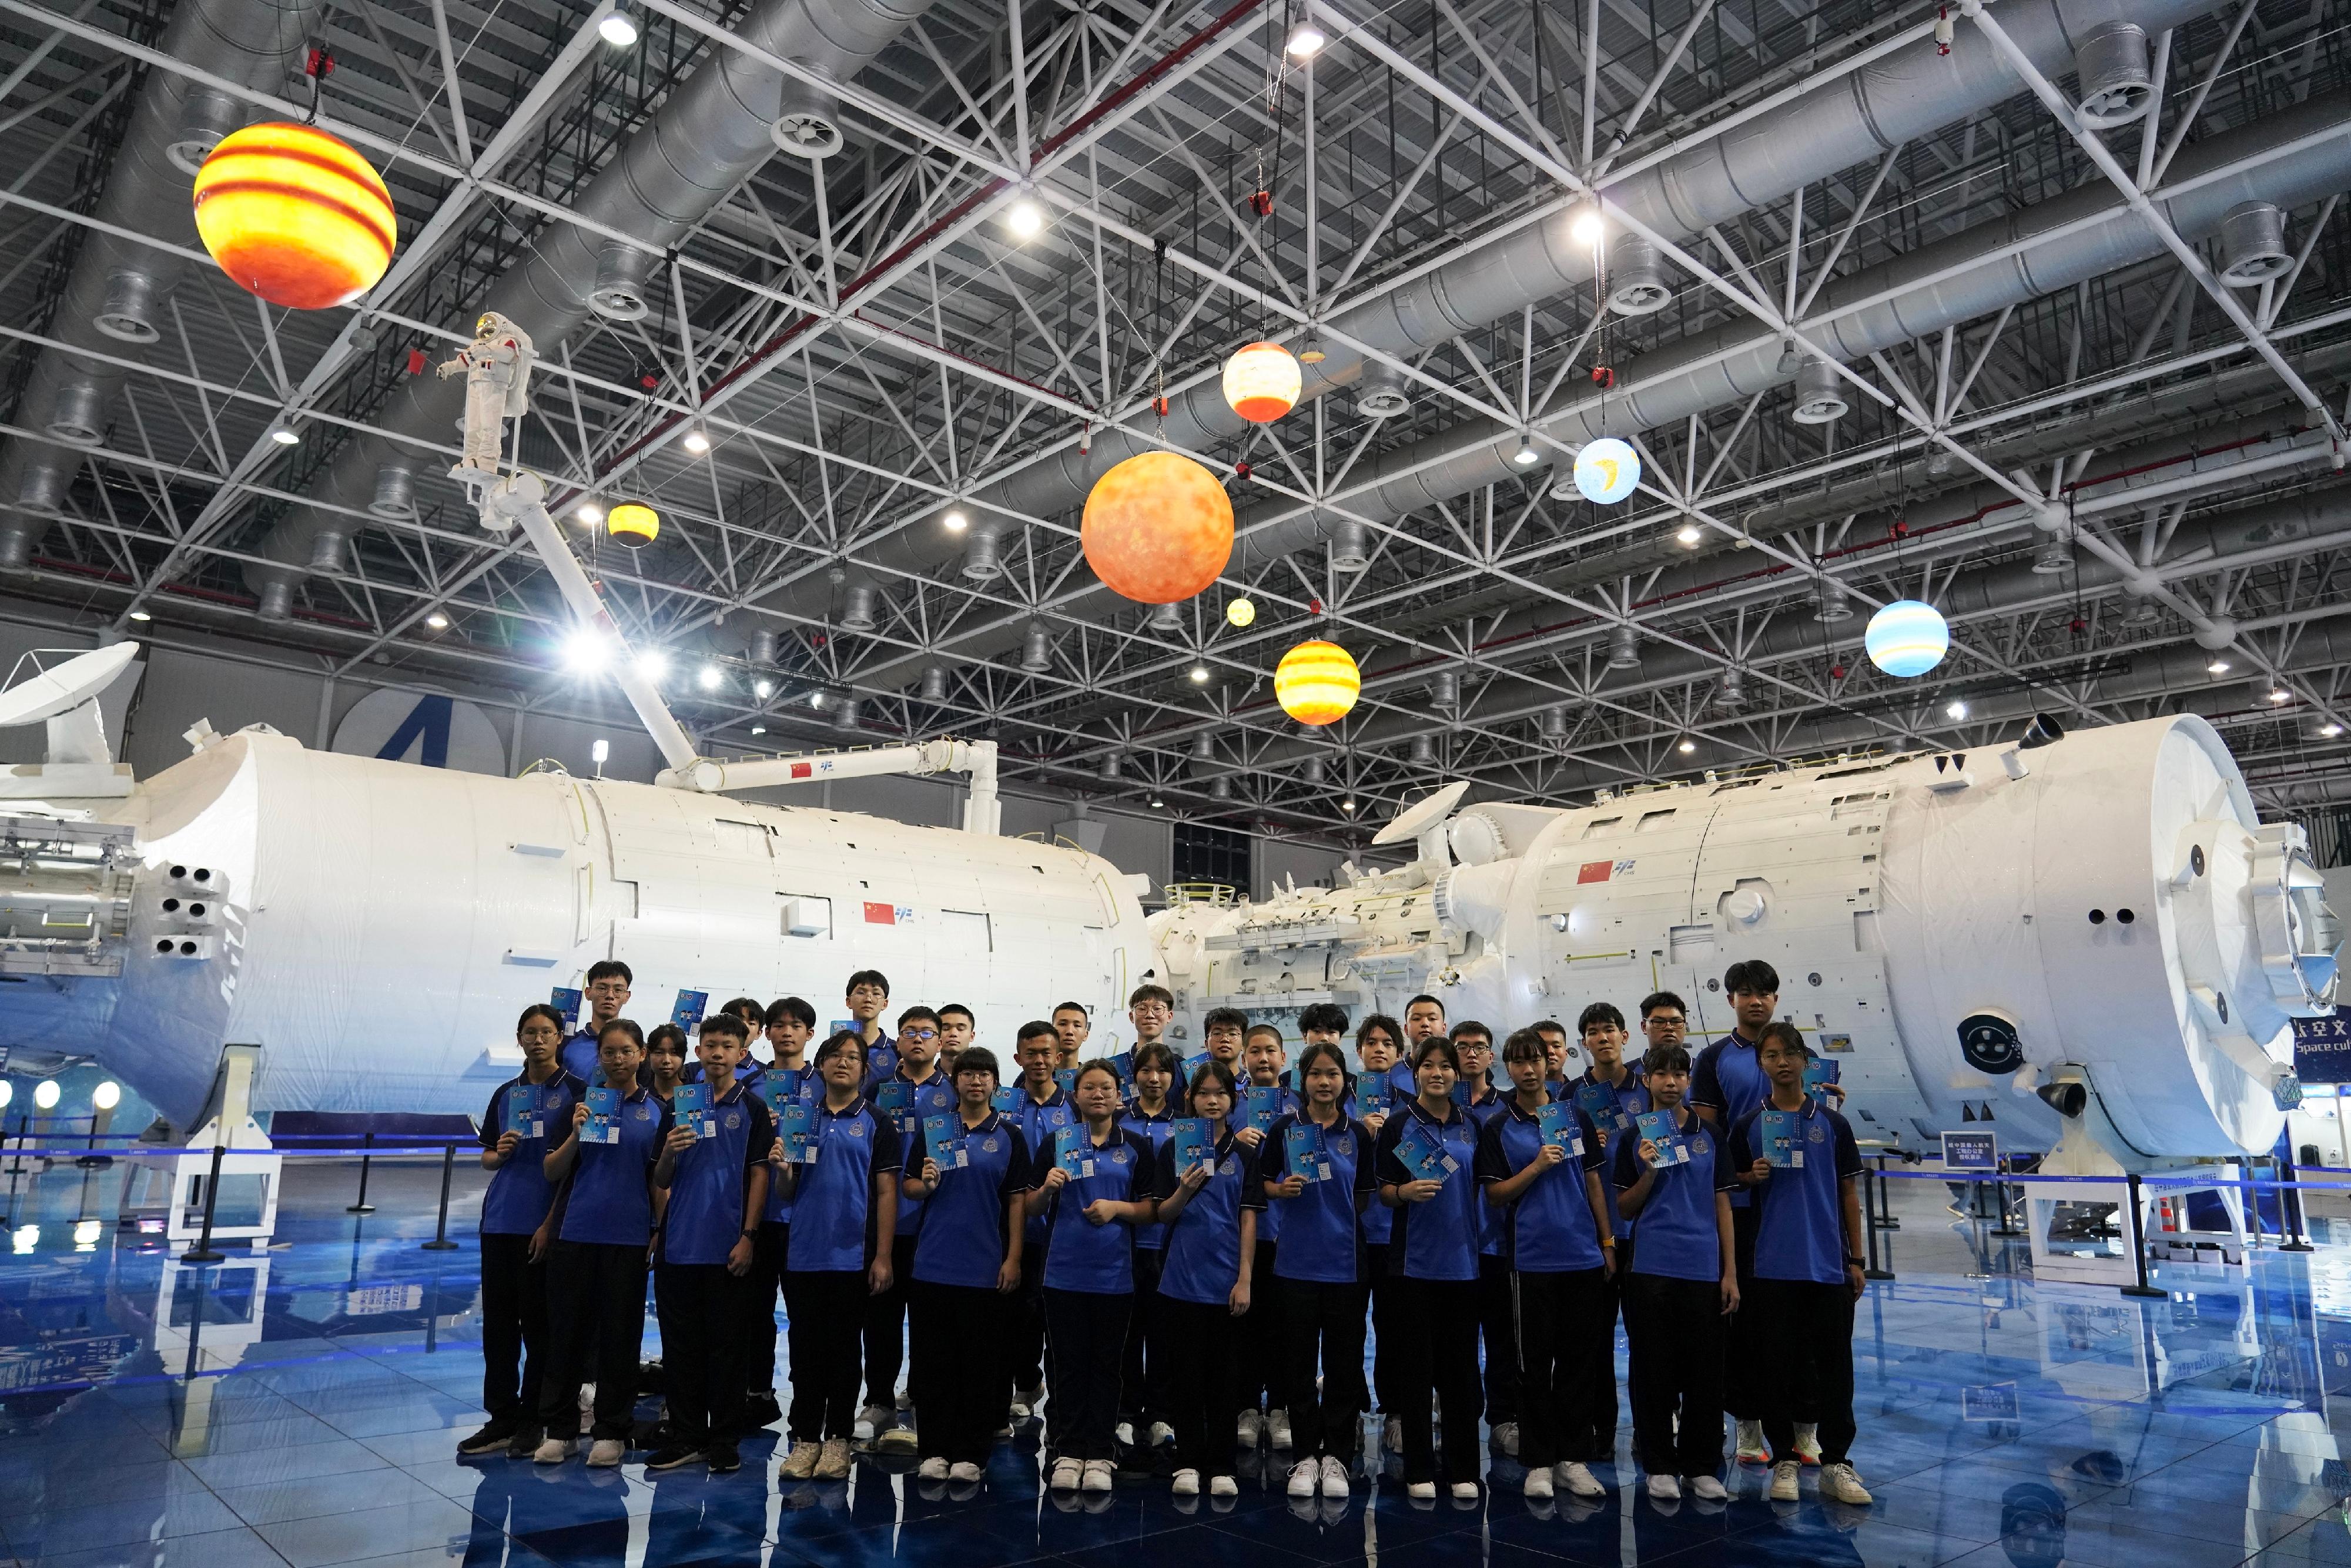 Members of the Immigration Department Youth Leaders Corps visited the replica of the "Tiangong" Space Station at the Zhuhai Space Center on July 26. 